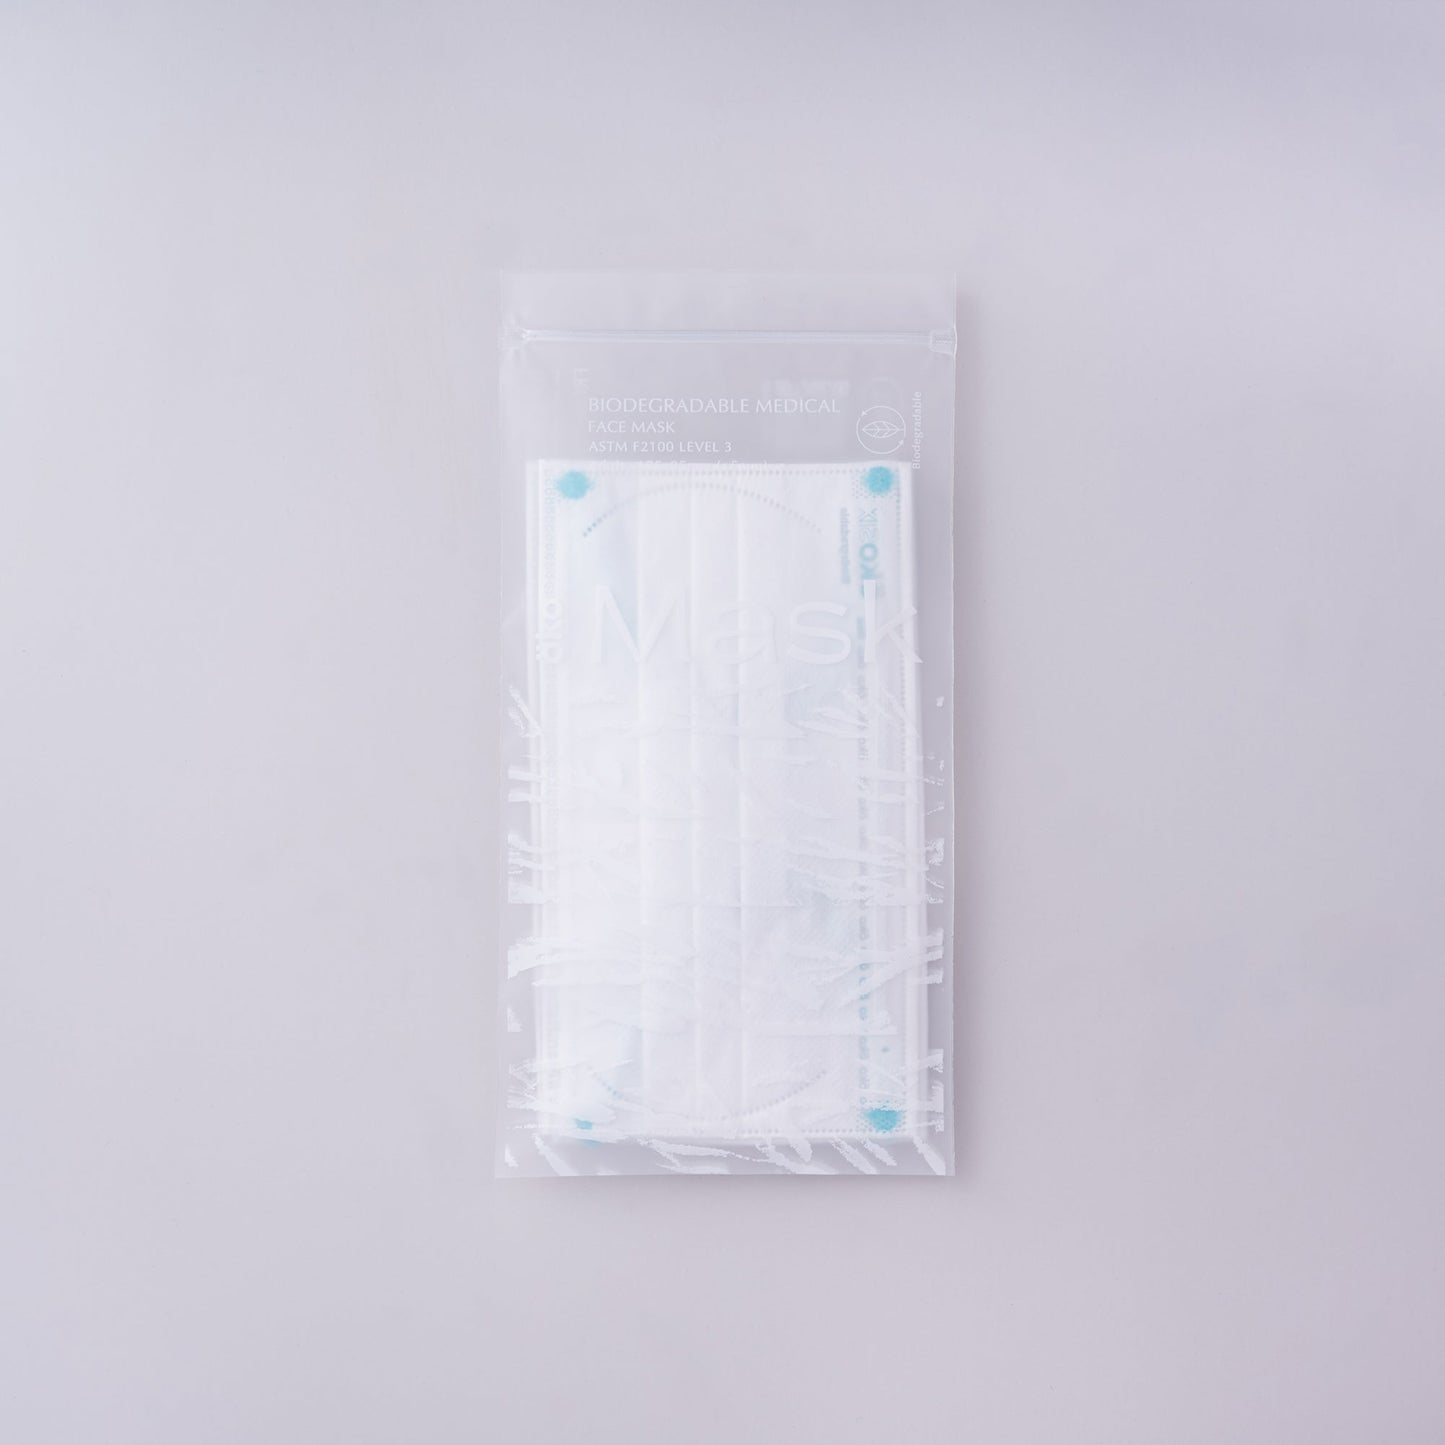 ÖKOSIX® Fully Biodegradable Level 3 Surgical Mask - Flat mask - Toddler - White - 36 pieces per box